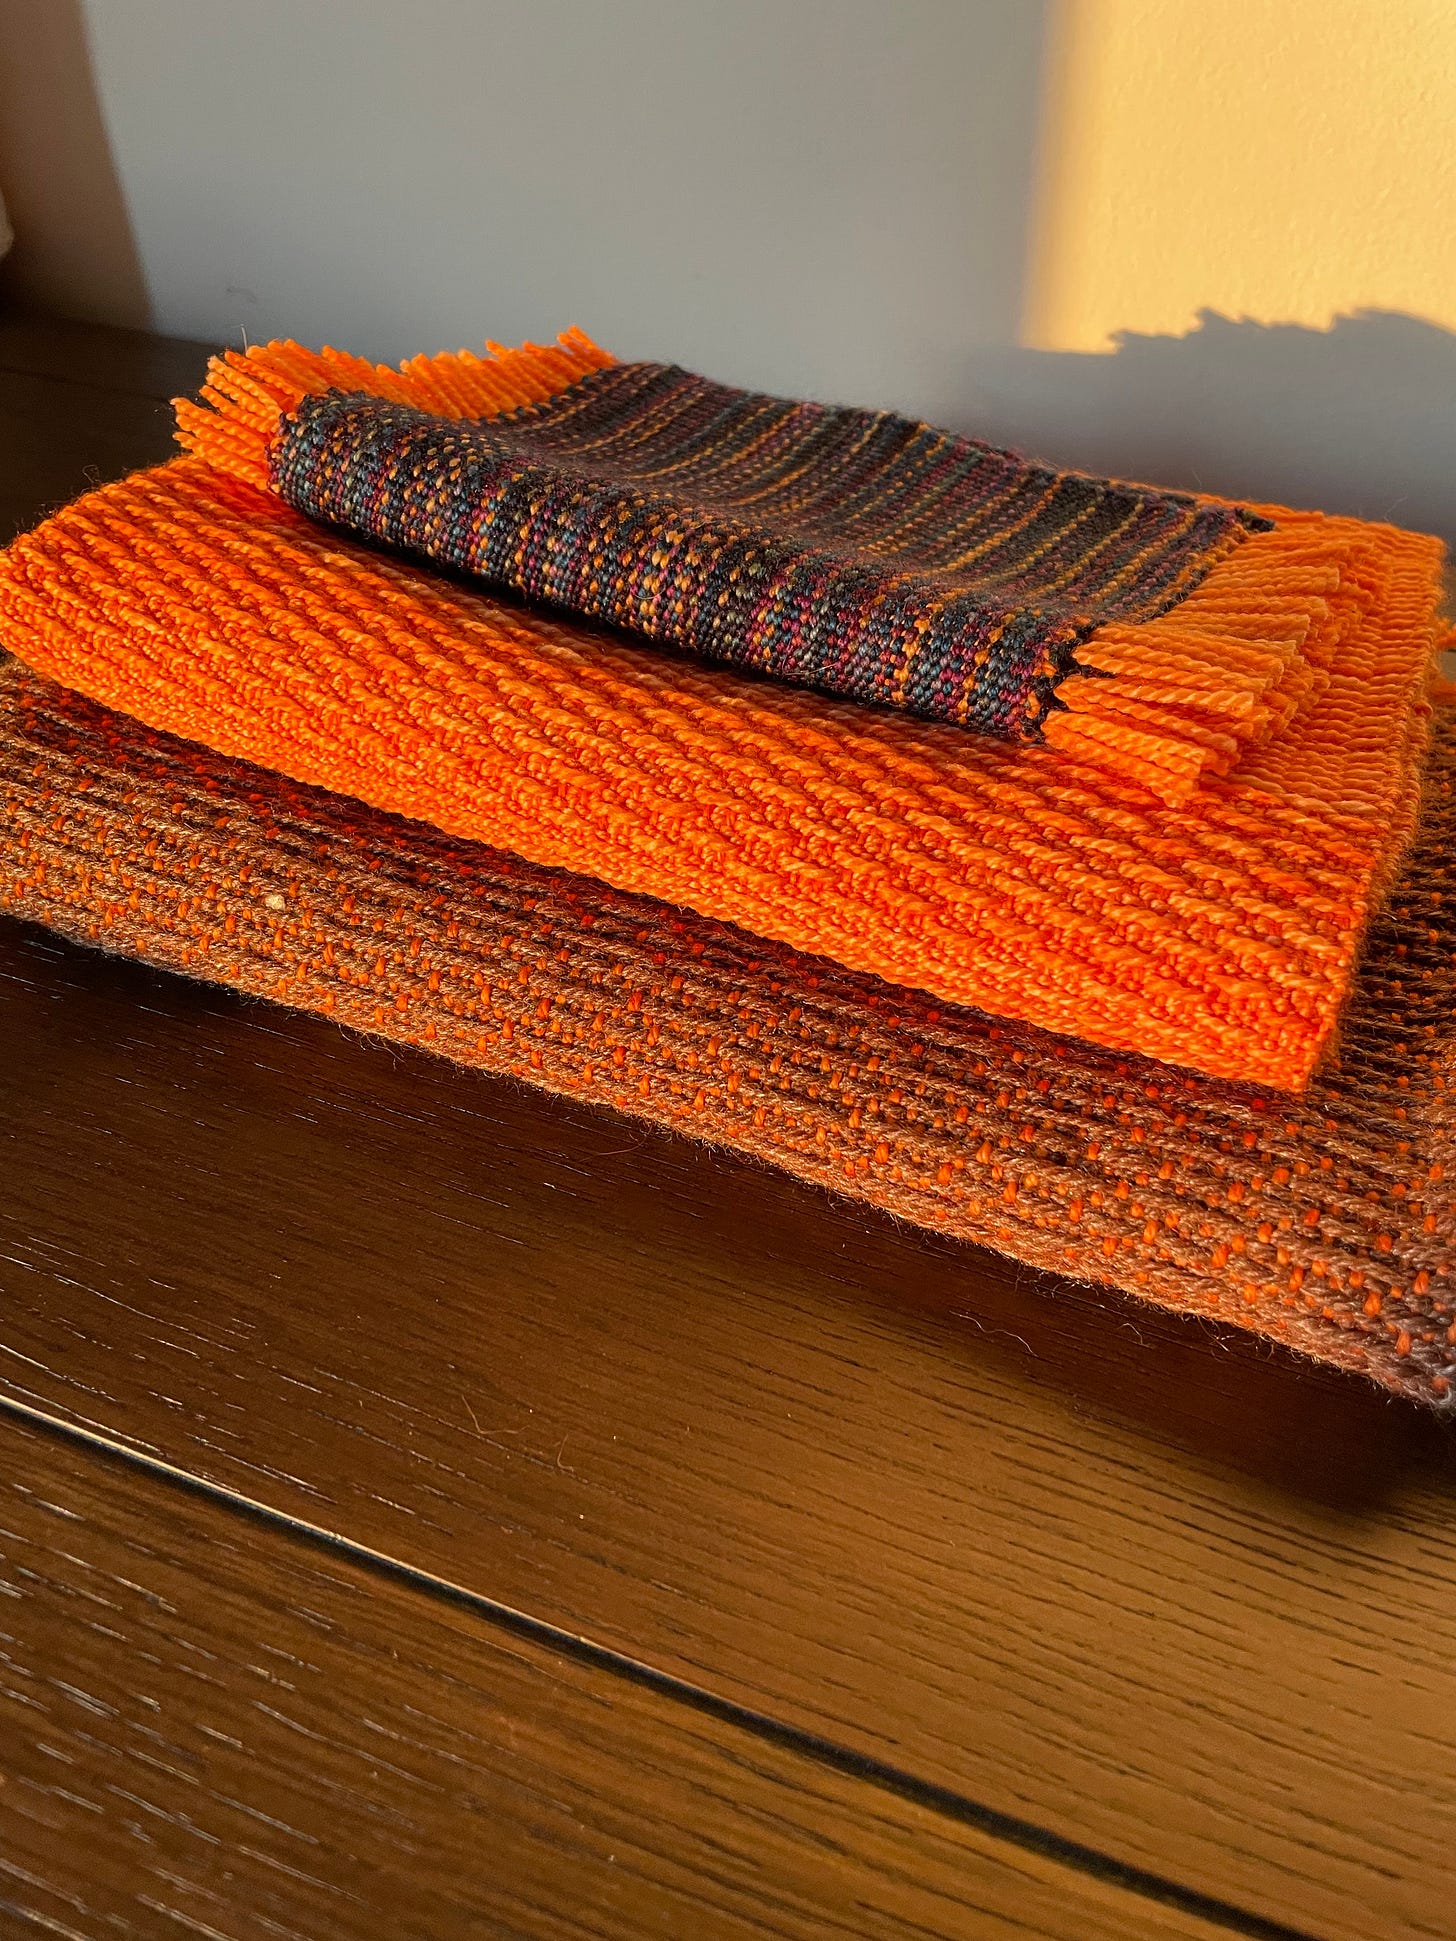 Three handwoven pieces folded and sitting in golden hour light. The top is multishaded blue, the second is all orange with long floats, and the bottom is brown with the orange warp showing through.